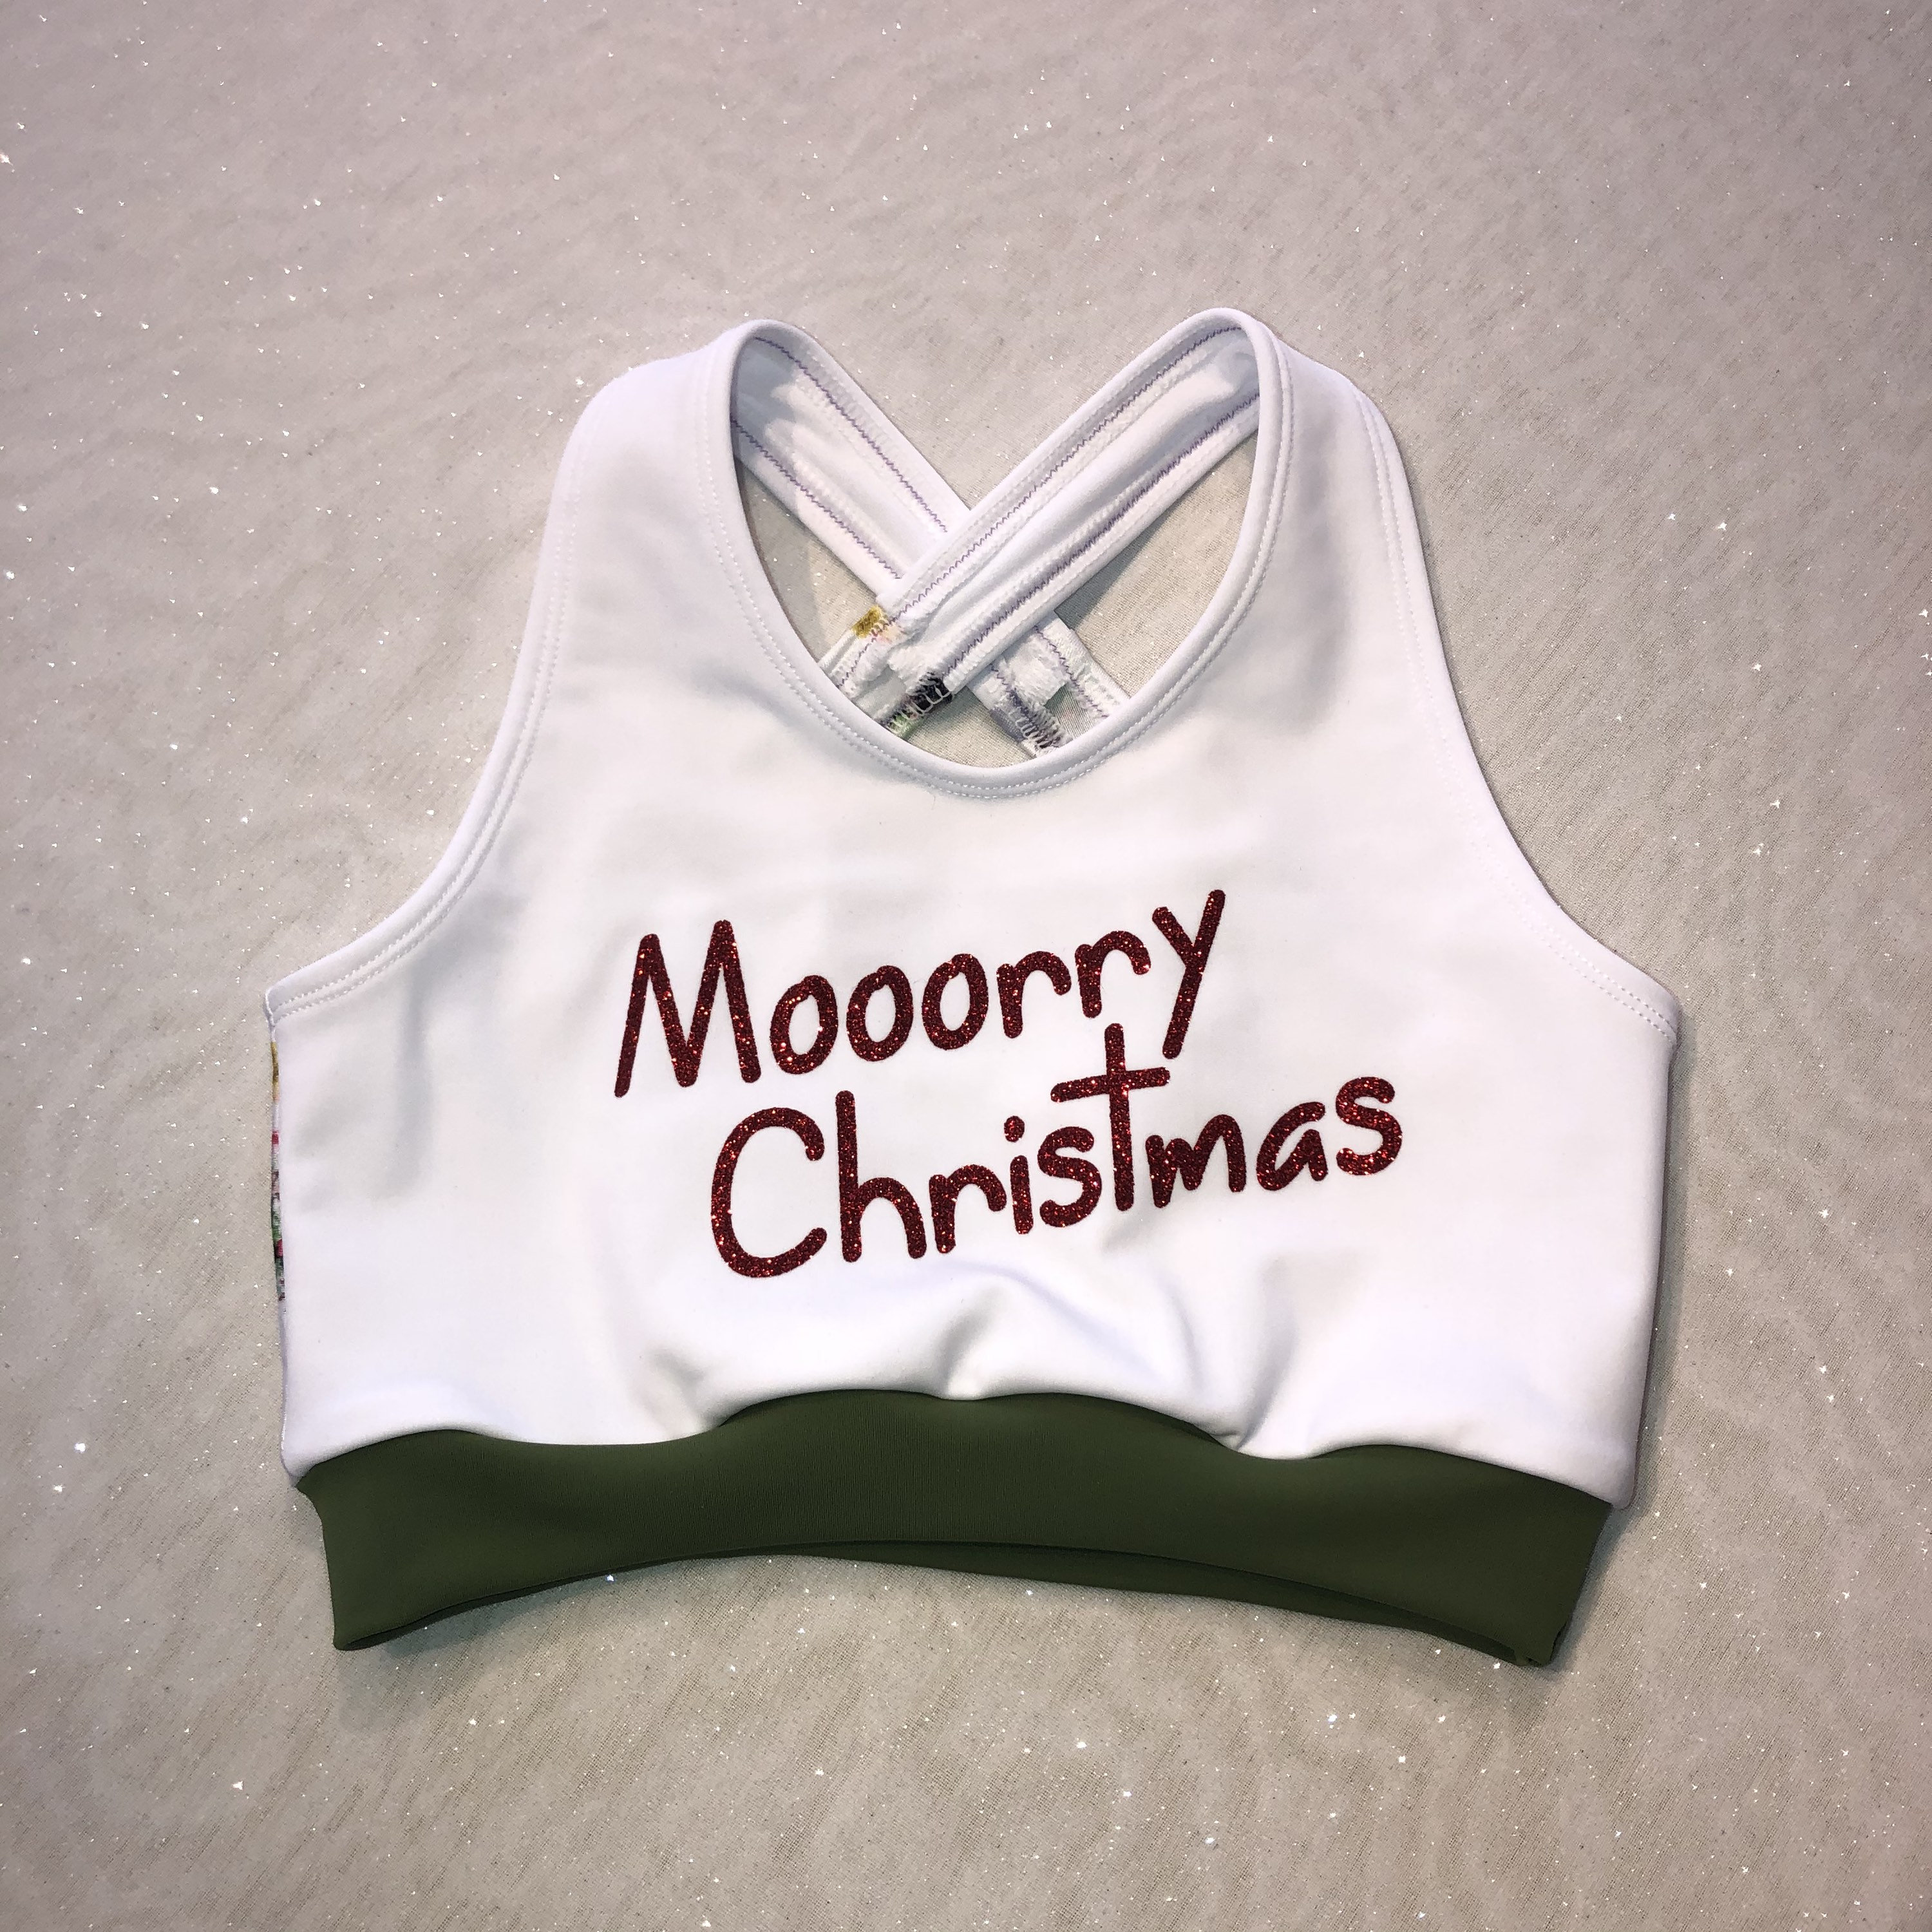 The moo-rry Christmas Christmas Sports Bra, Spandex Shorts and Optional  Scrunchie / Cheer Bow Set / Girls Dancewear / Christmas Practice -   Canada